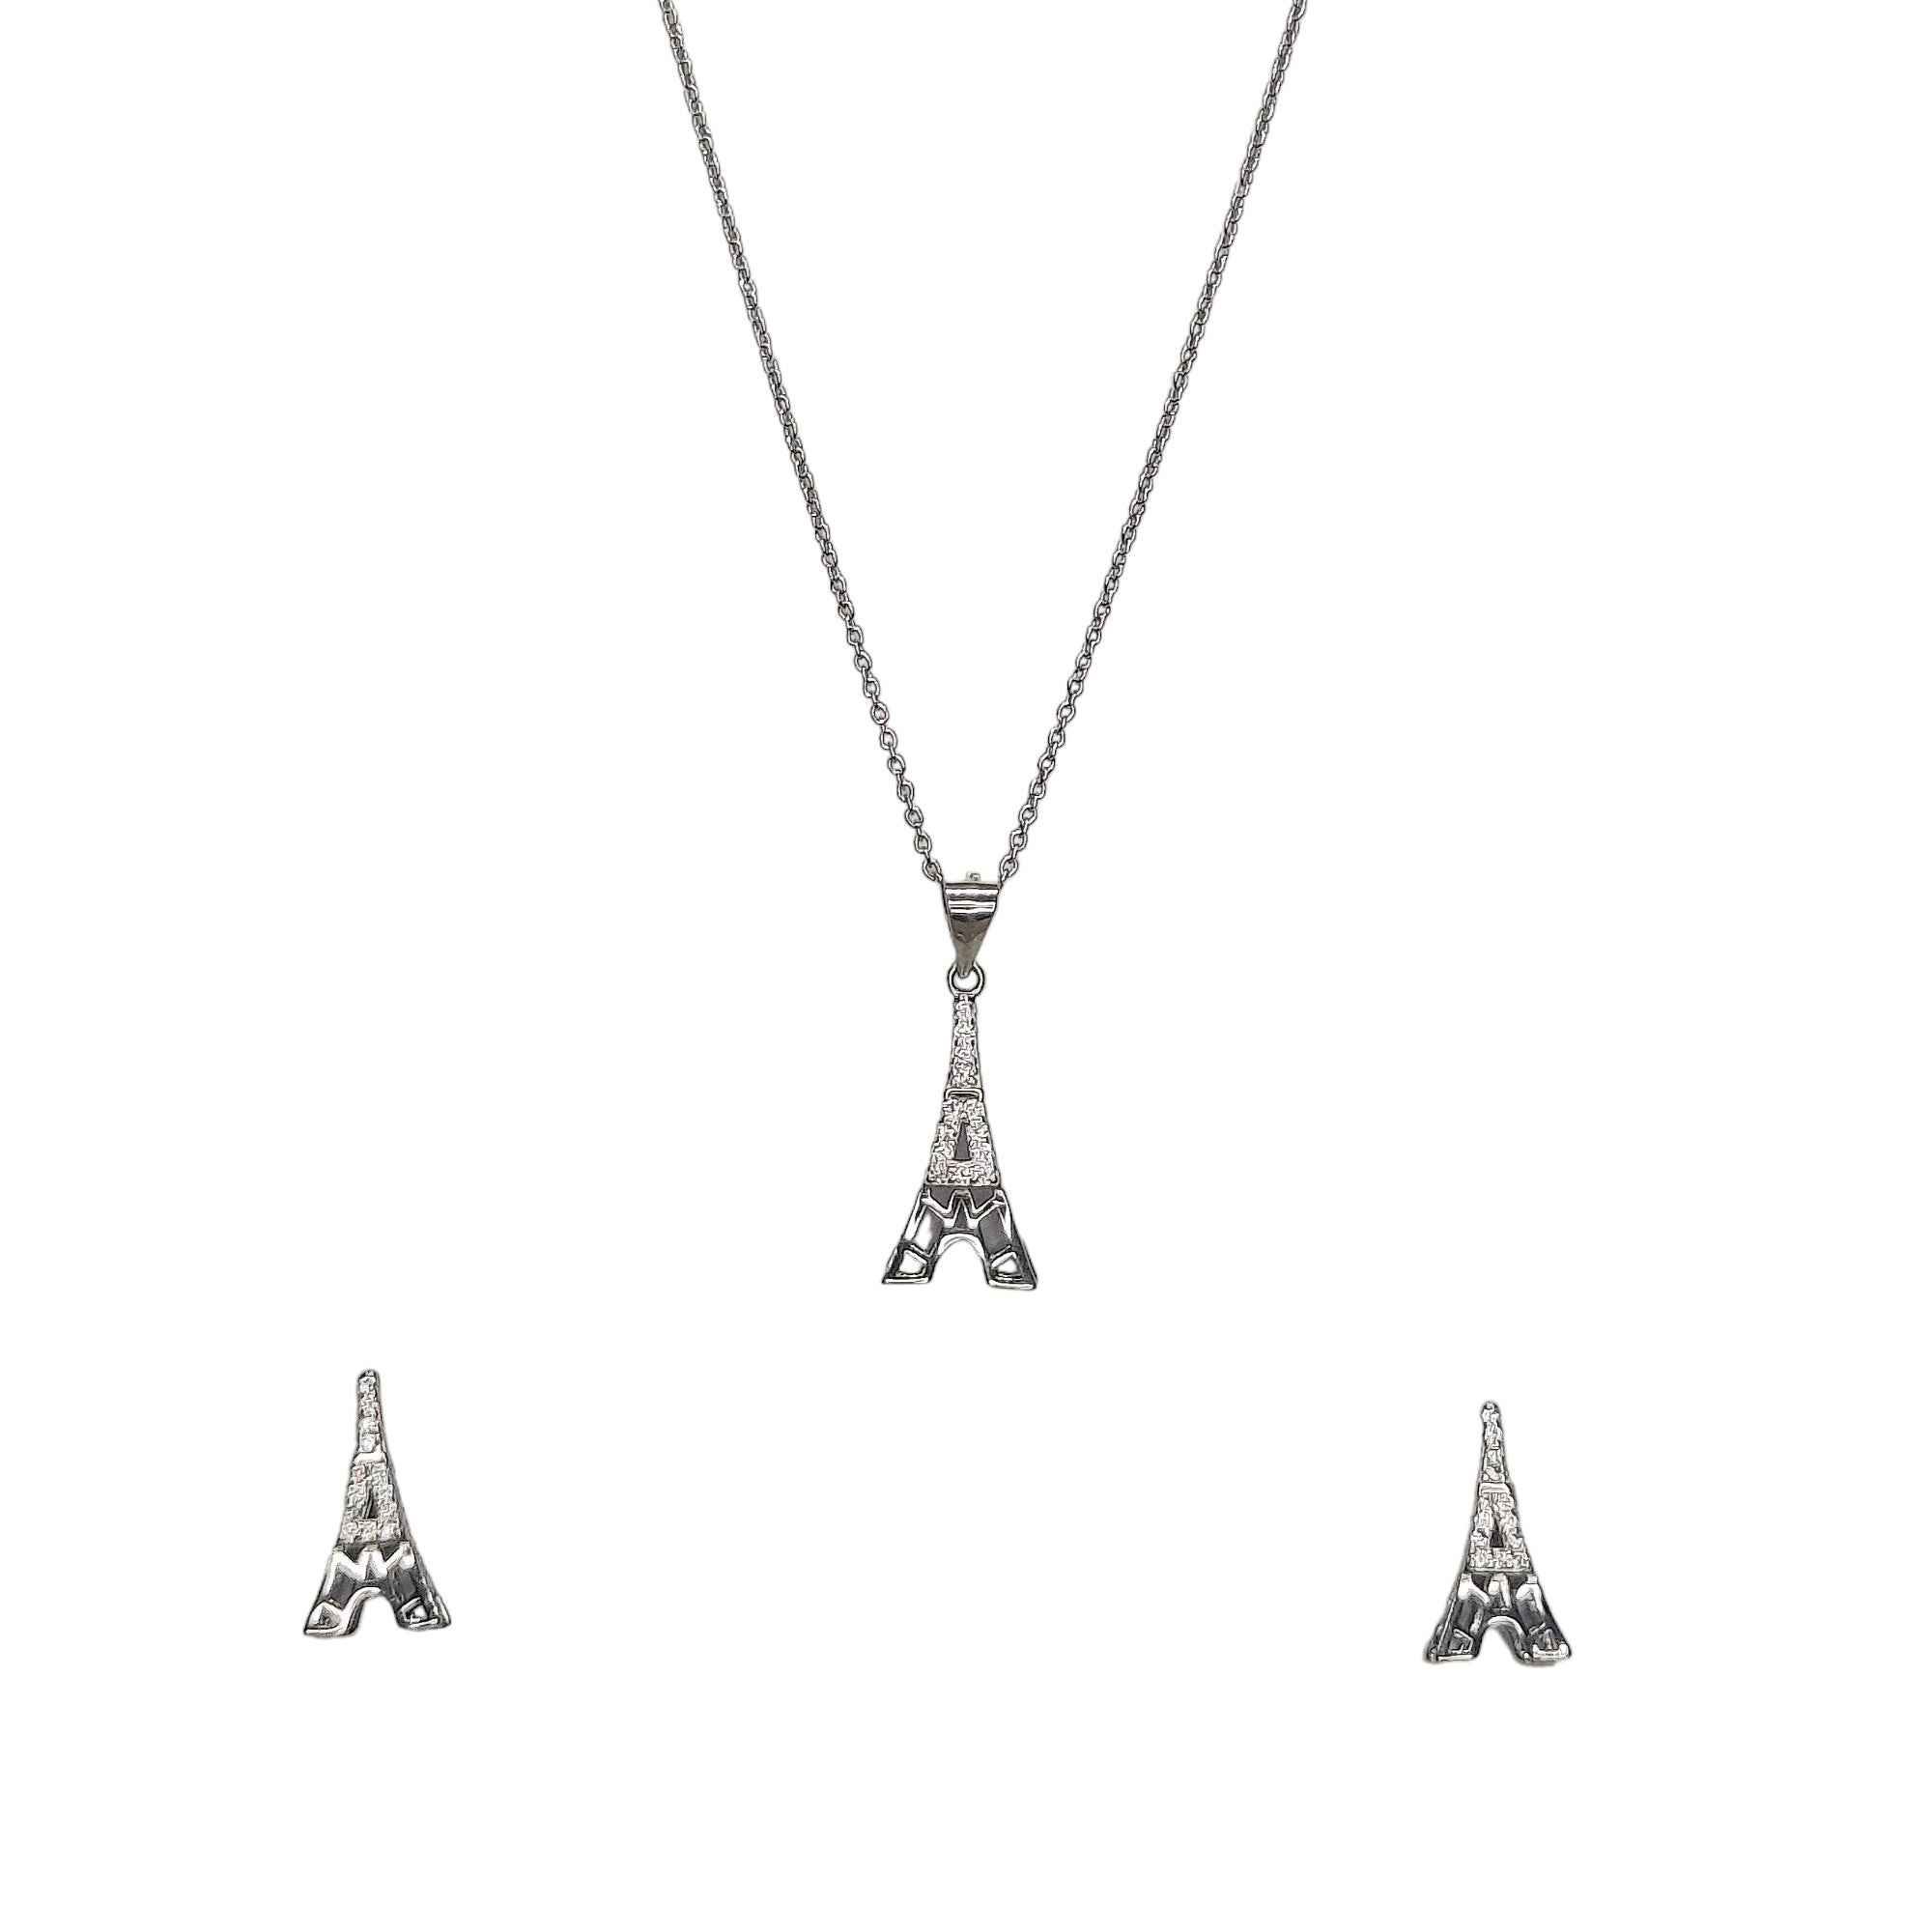 Eiffel Tower Sterling Silver Pendent Set With Chain for Women - Rivansh